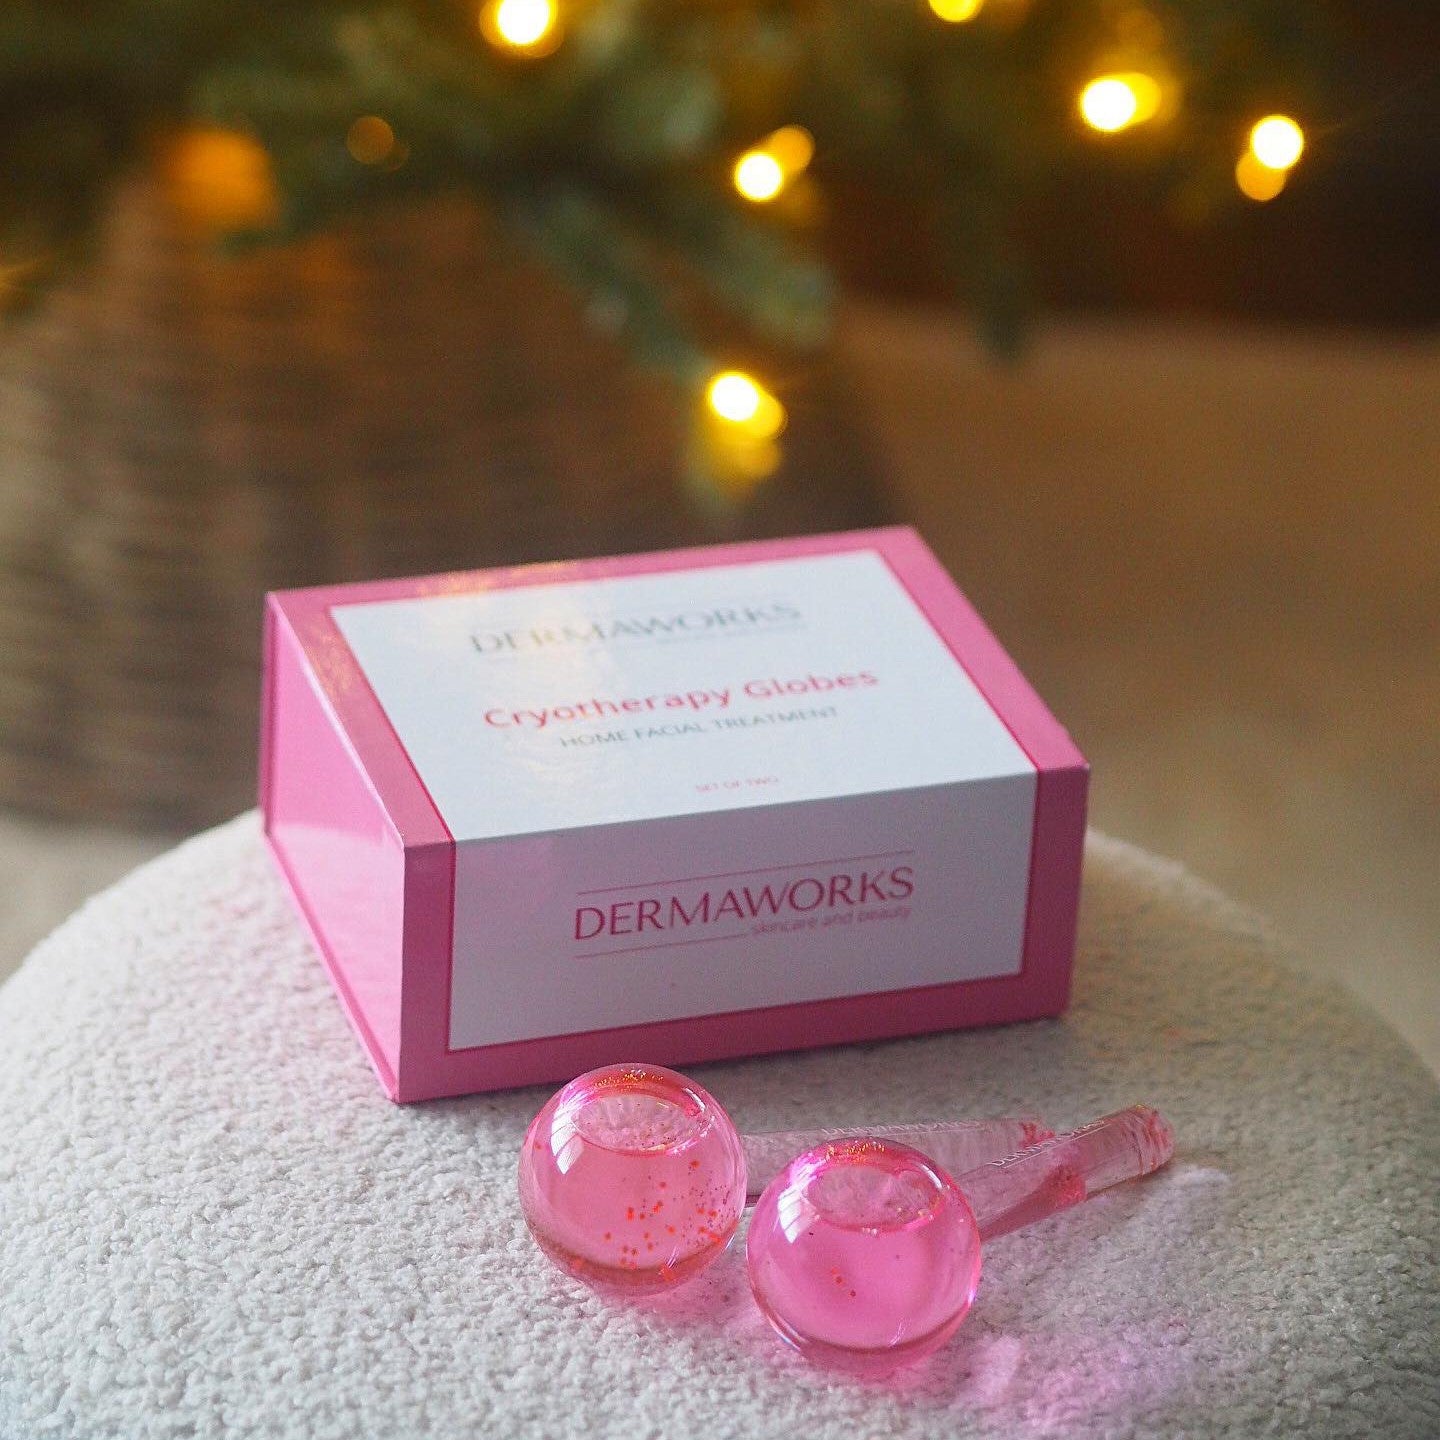 Dermaworks ice globes or, ice face roller with box. Birthday gifts for her. Relaxation gifts for women. Teenage girls gifts.